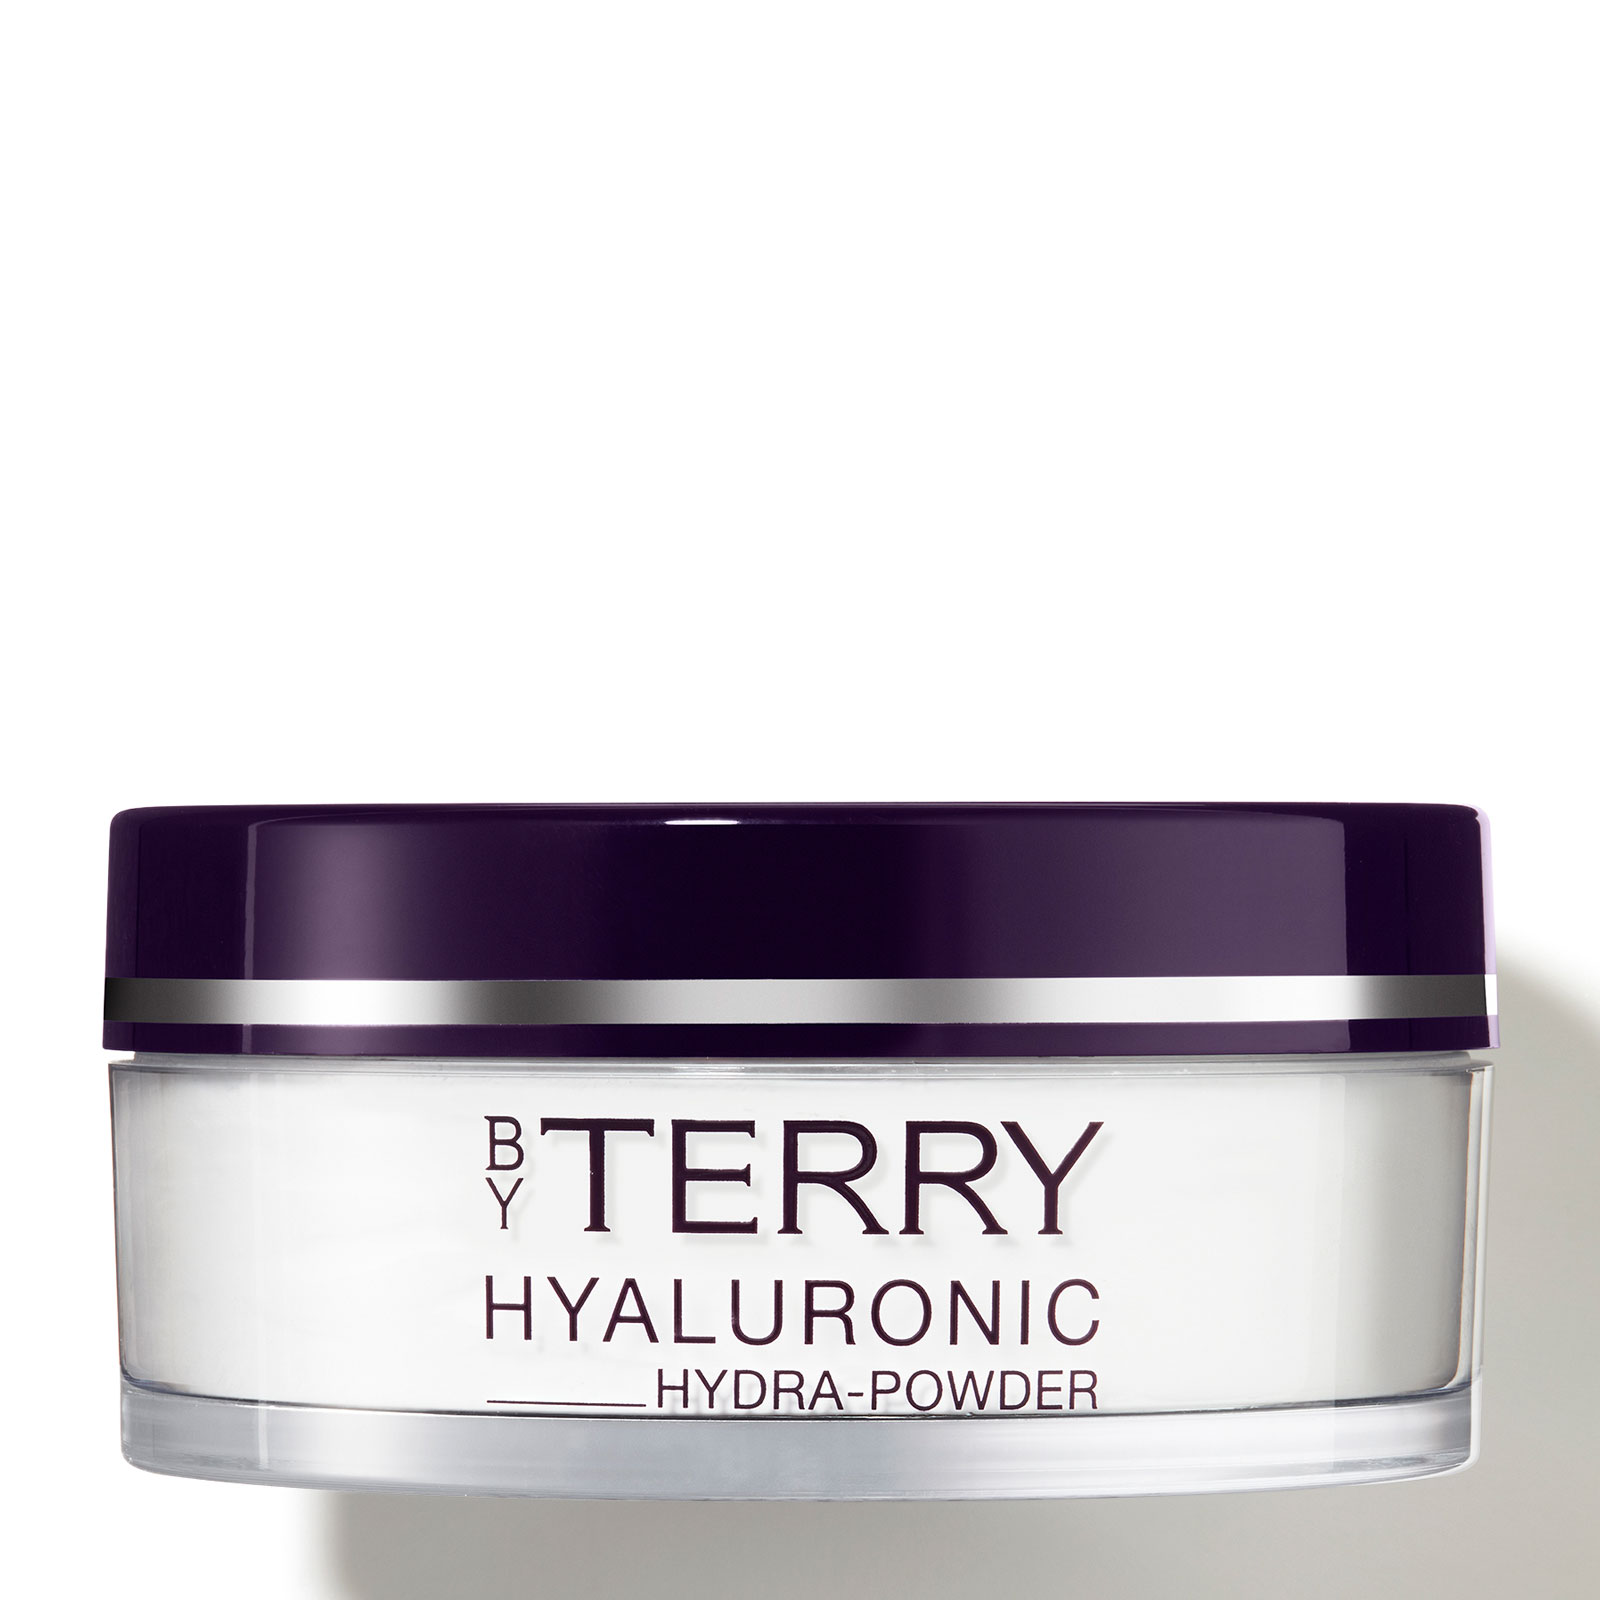 BY TERRY Hyaluronic Hydra Powder 10g